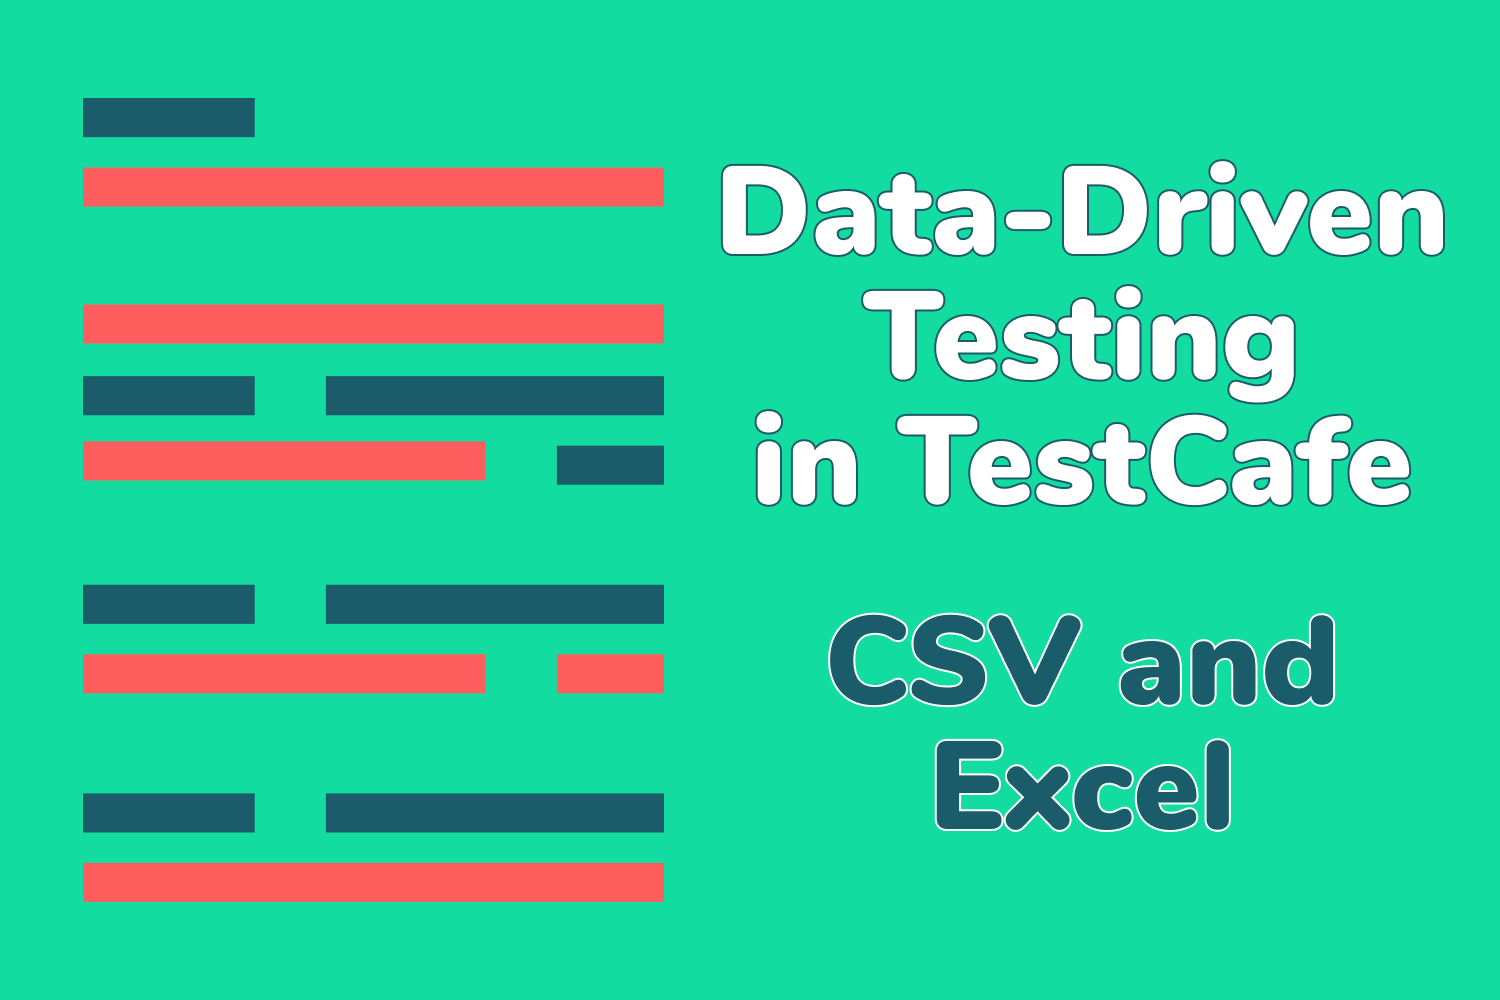 Data-Driven Testing in TestCafe (Part 2) - CSV and Excel